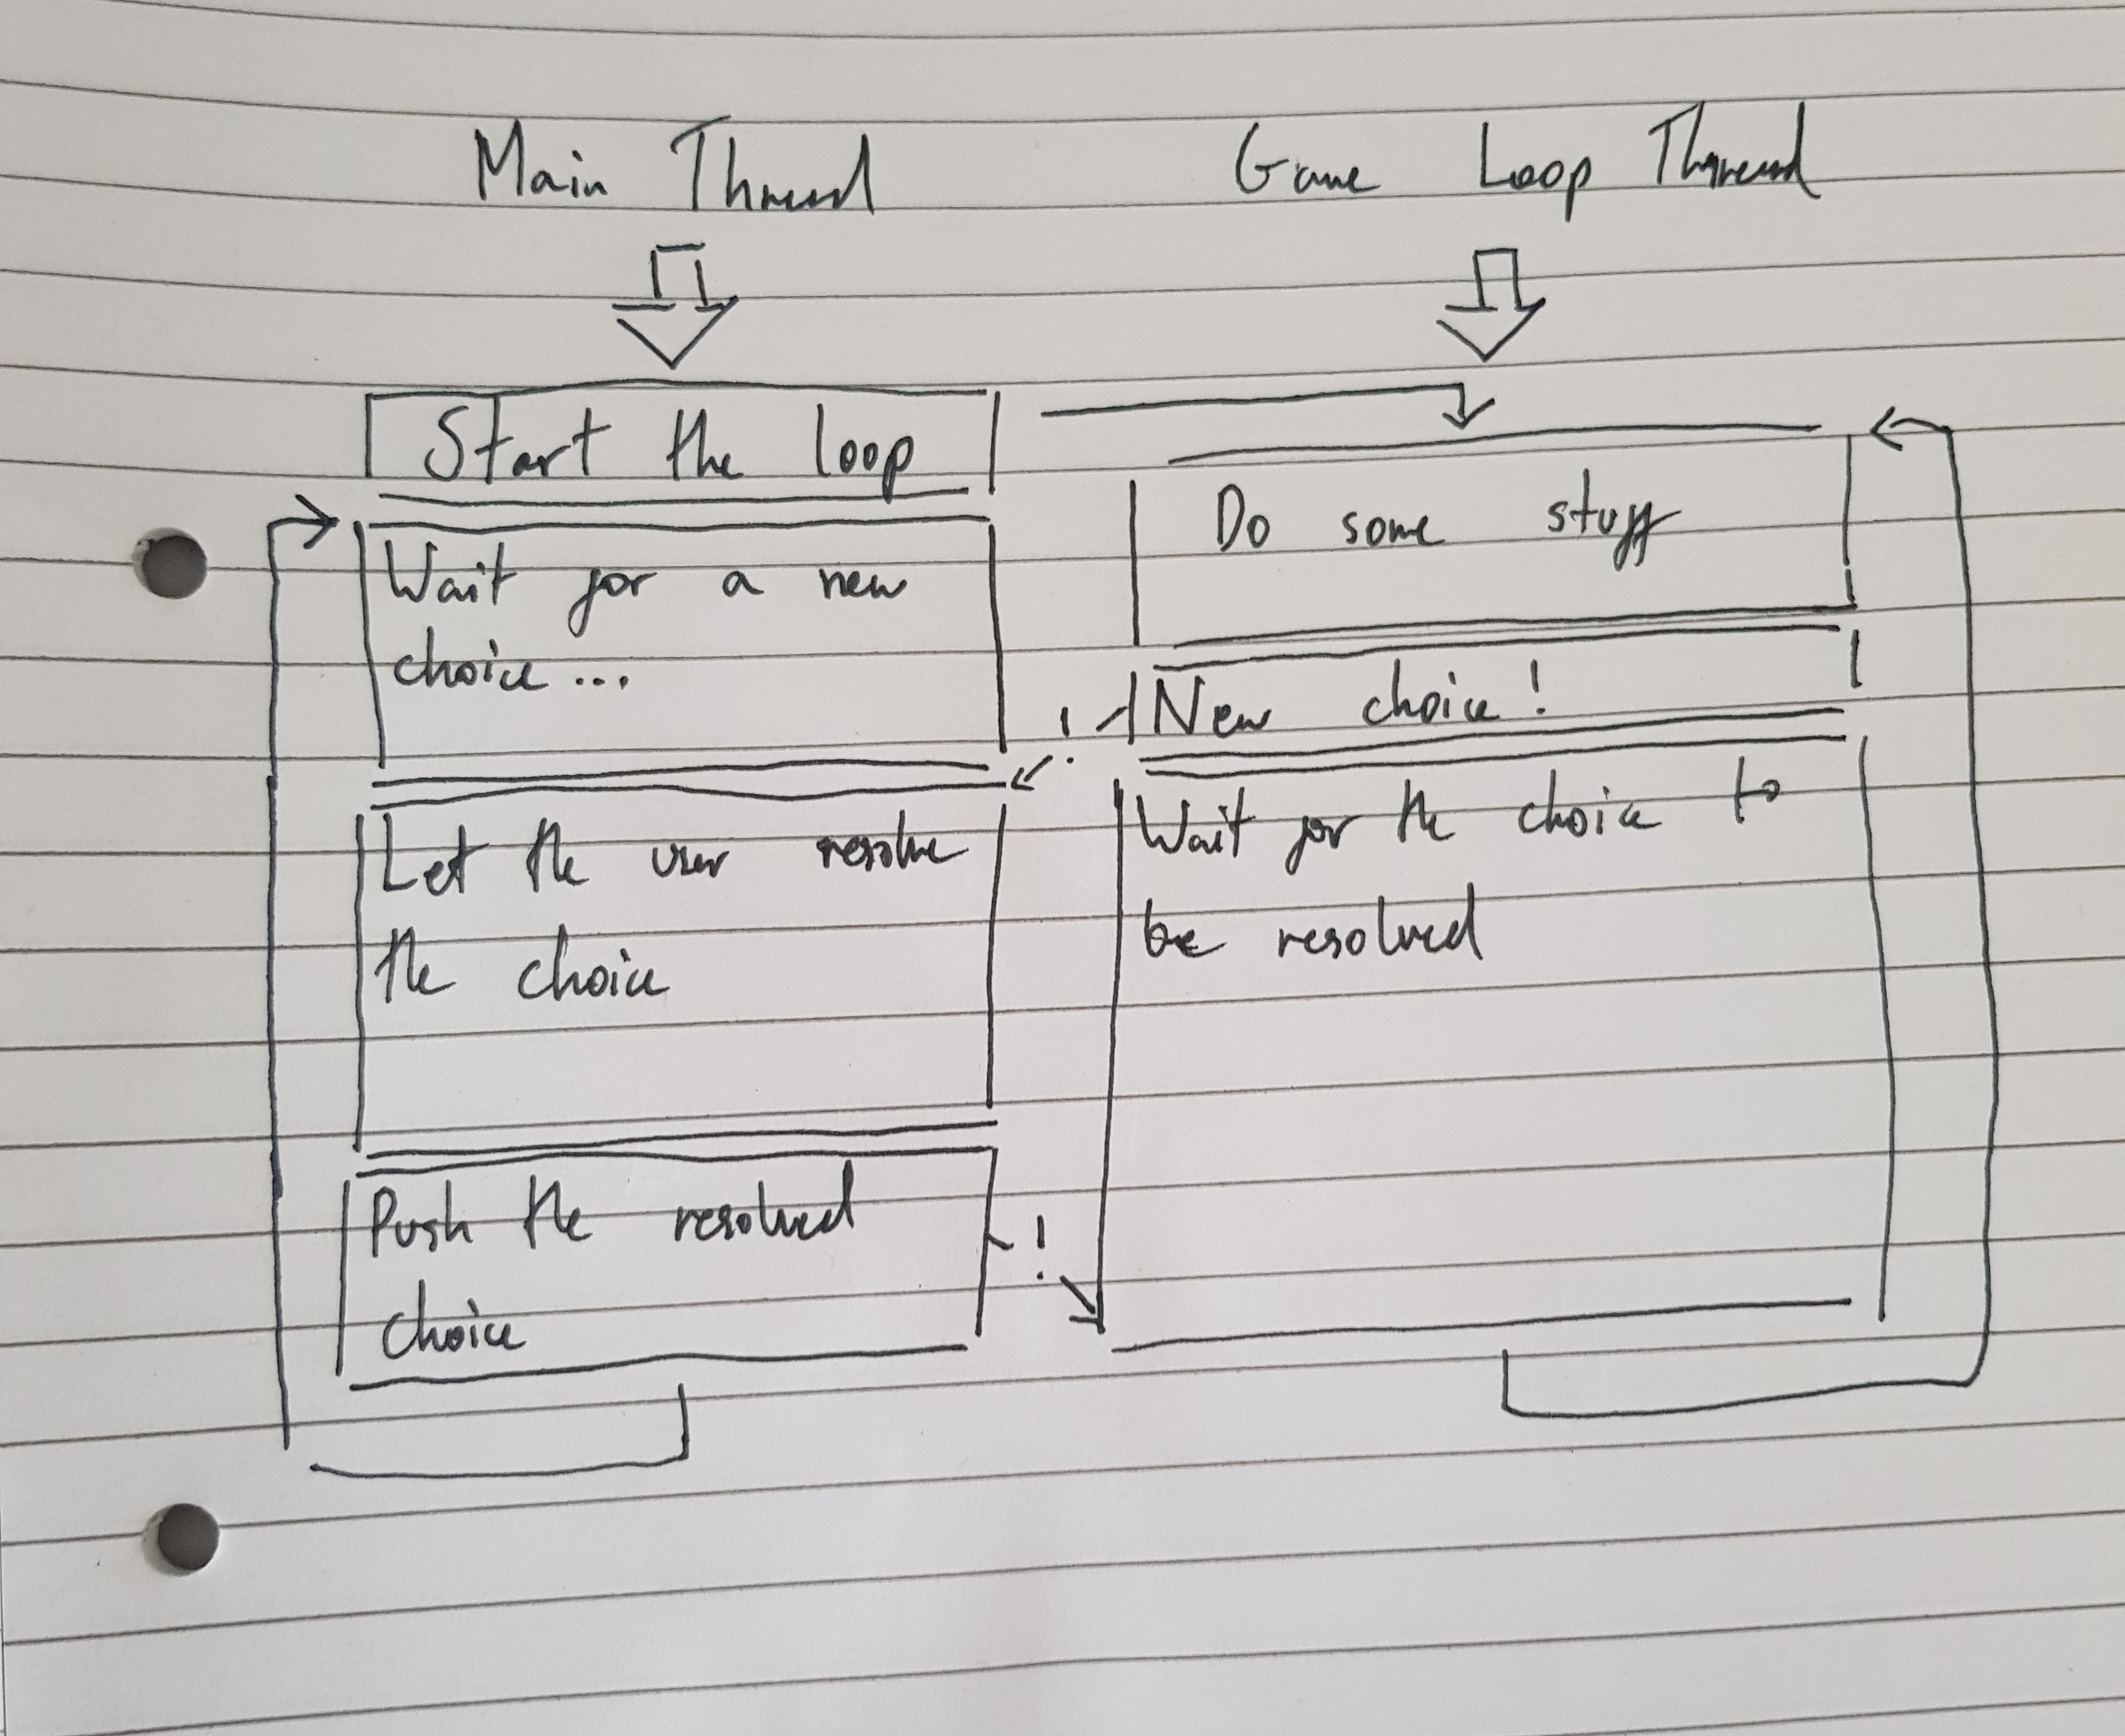 A photo of my sketchbook, detailing how the main thread and the game loop communicate.